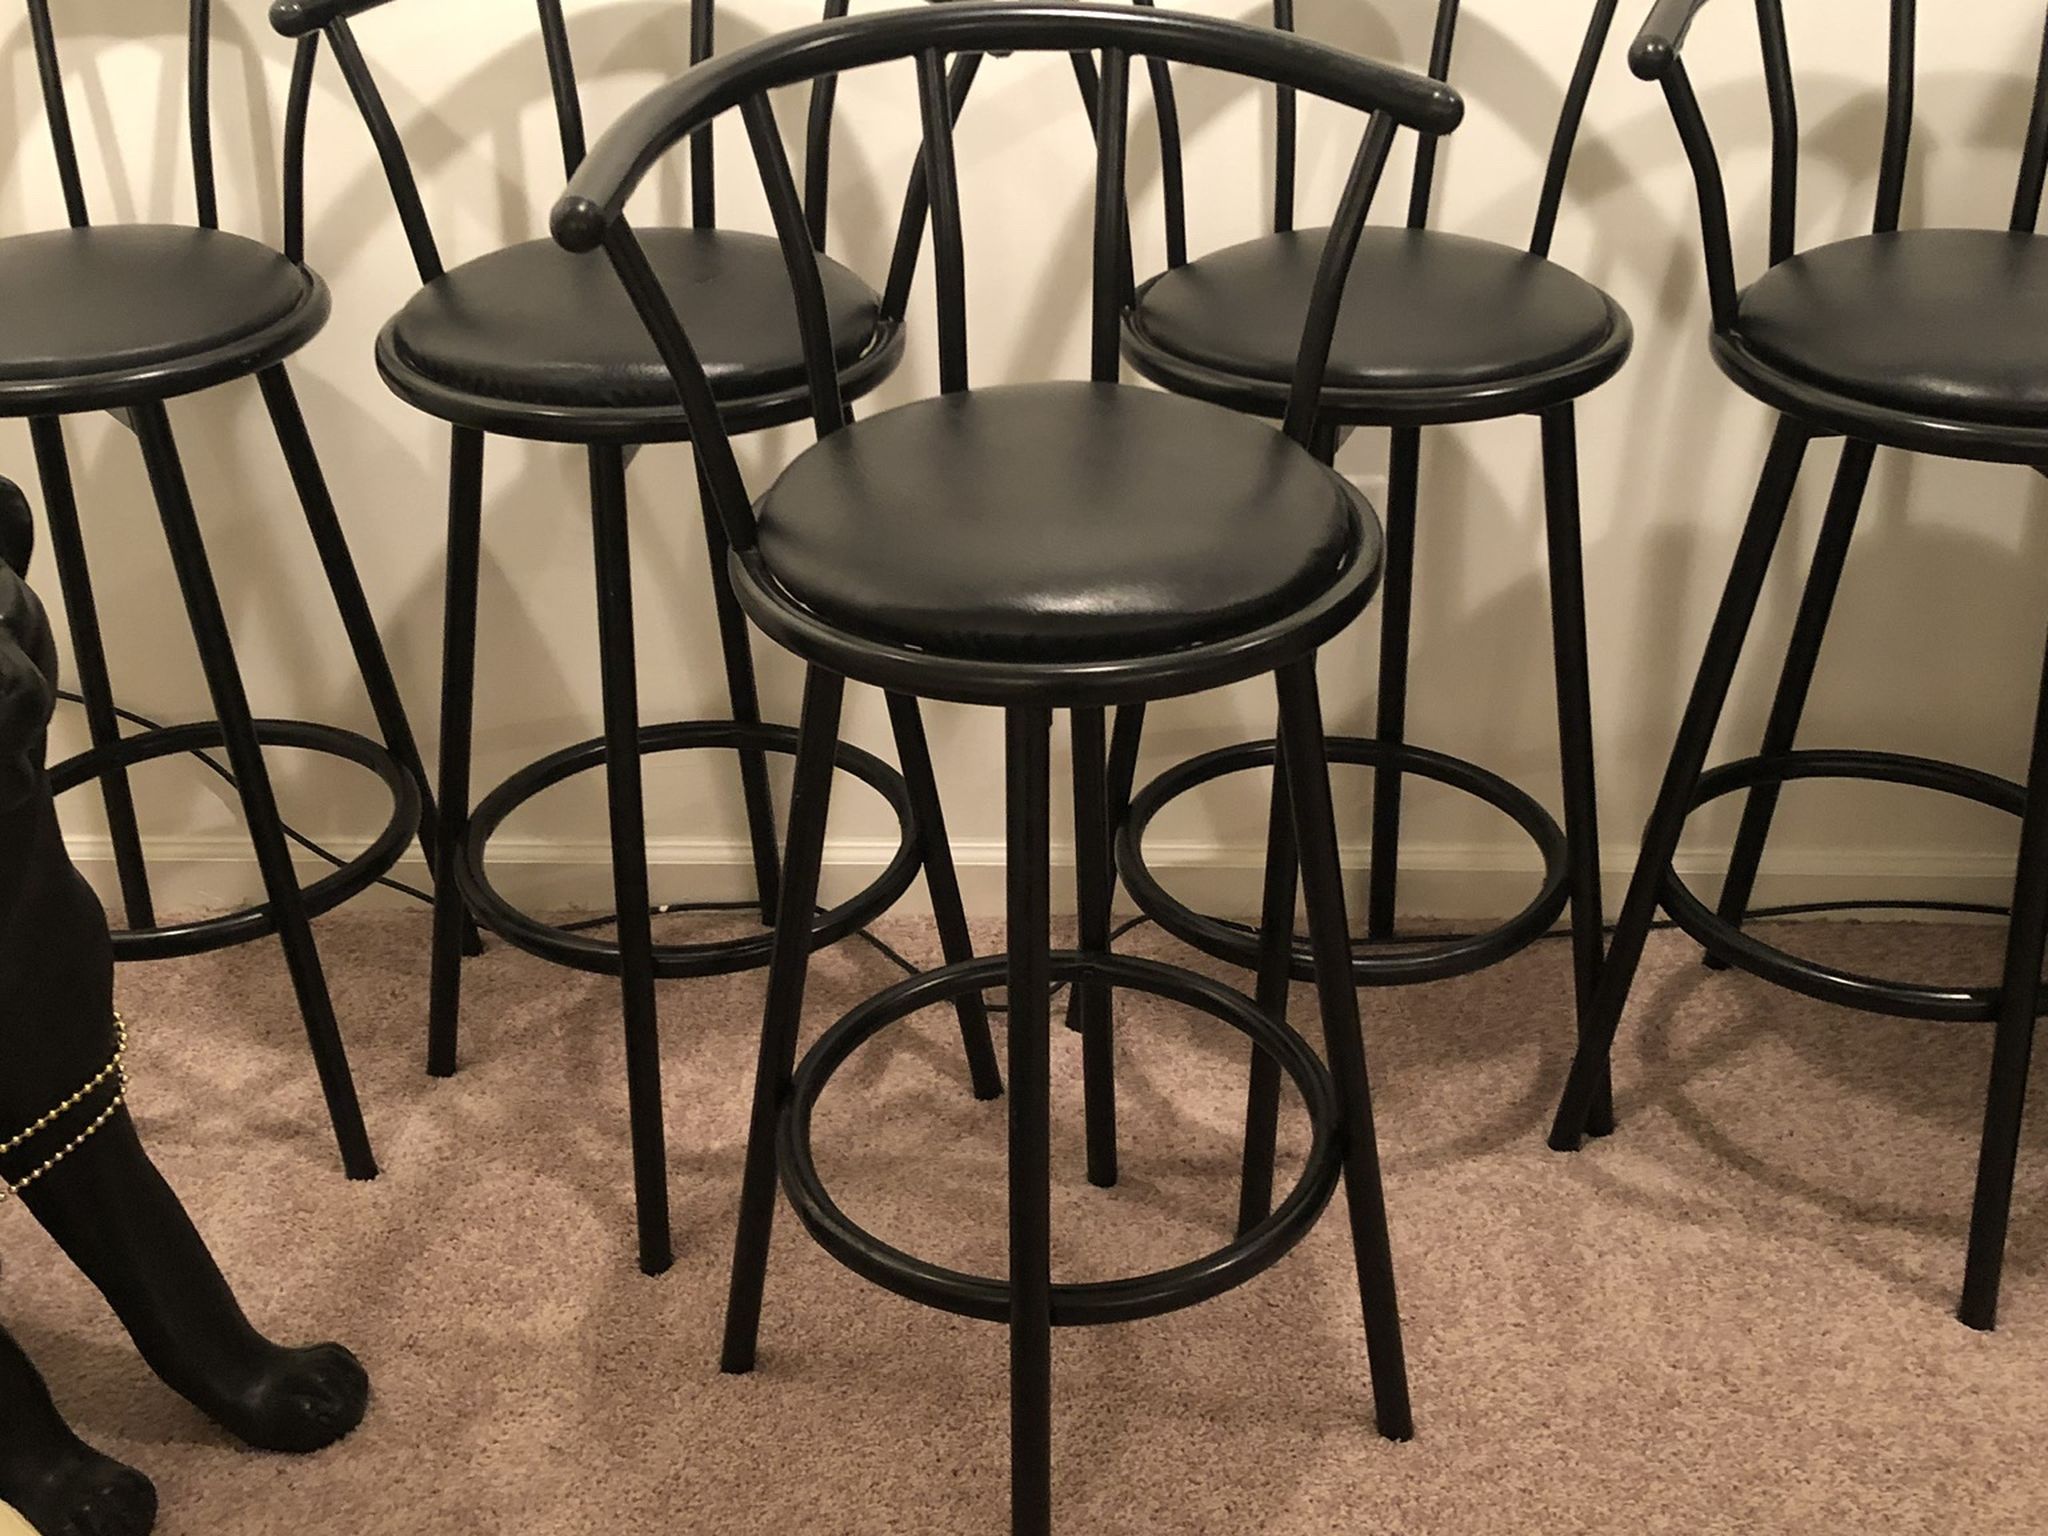 Black bar chairs Or table chairs